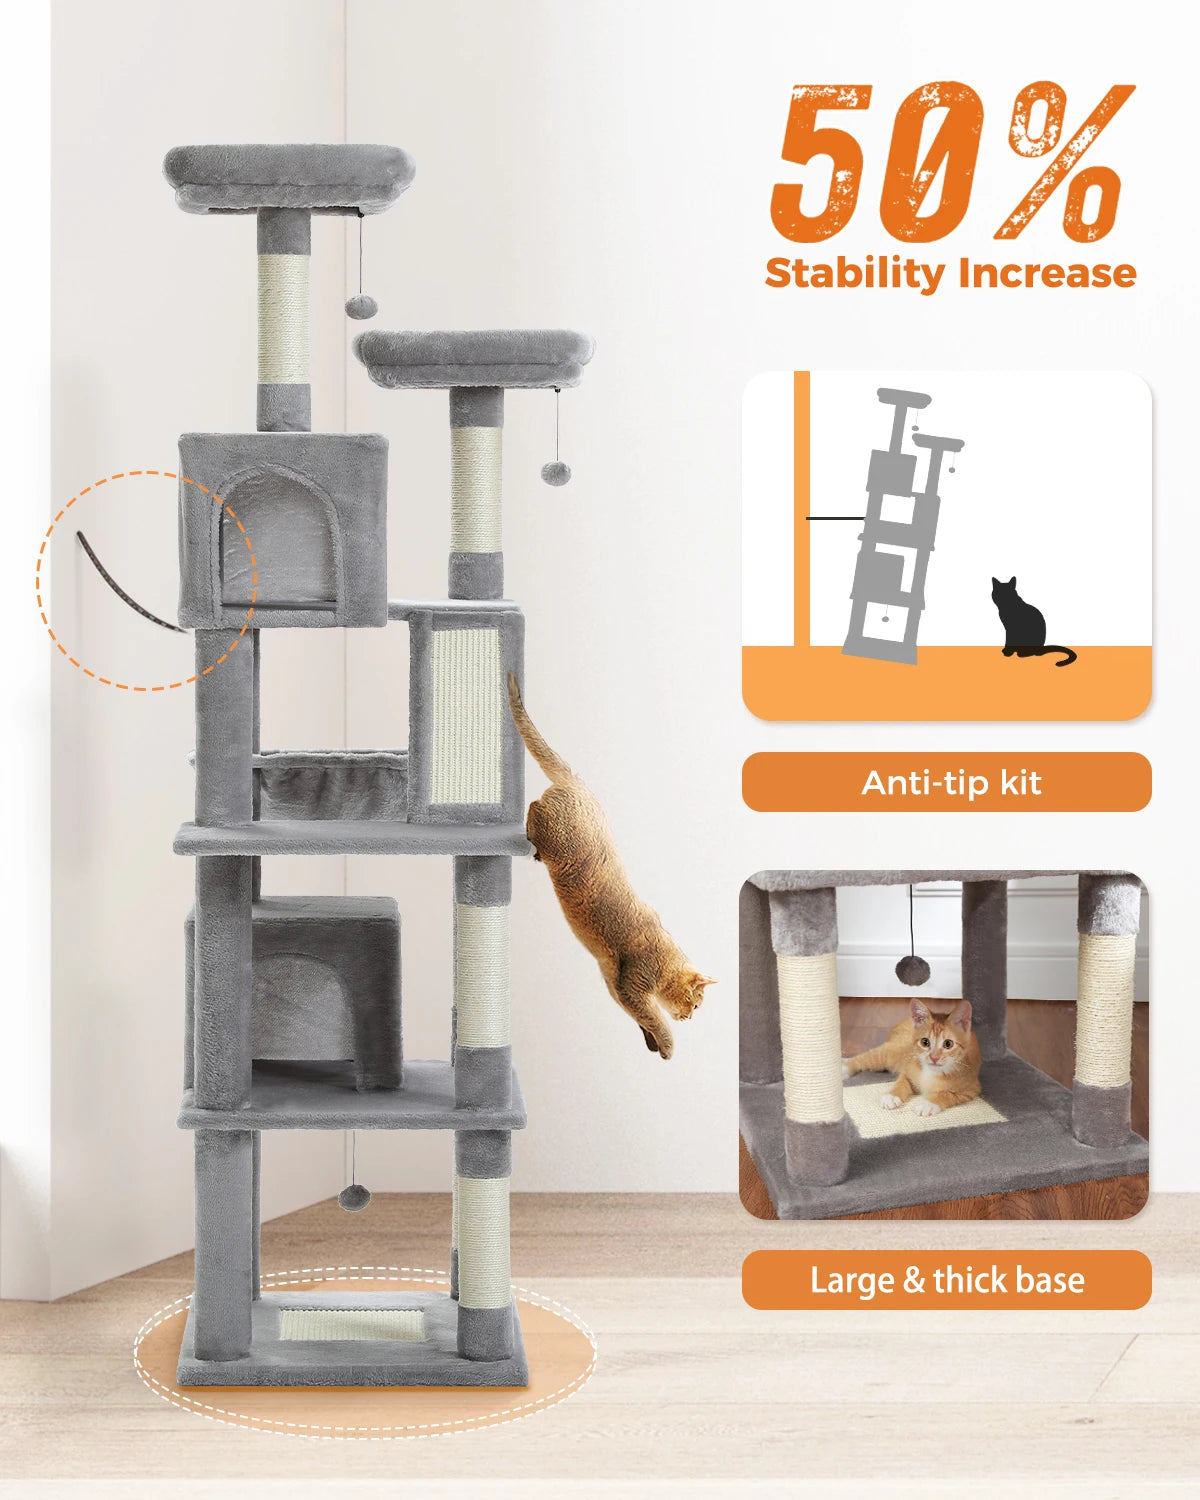 180cm Grand Multi-Level Cat Tree with Condo and Scratching Posts